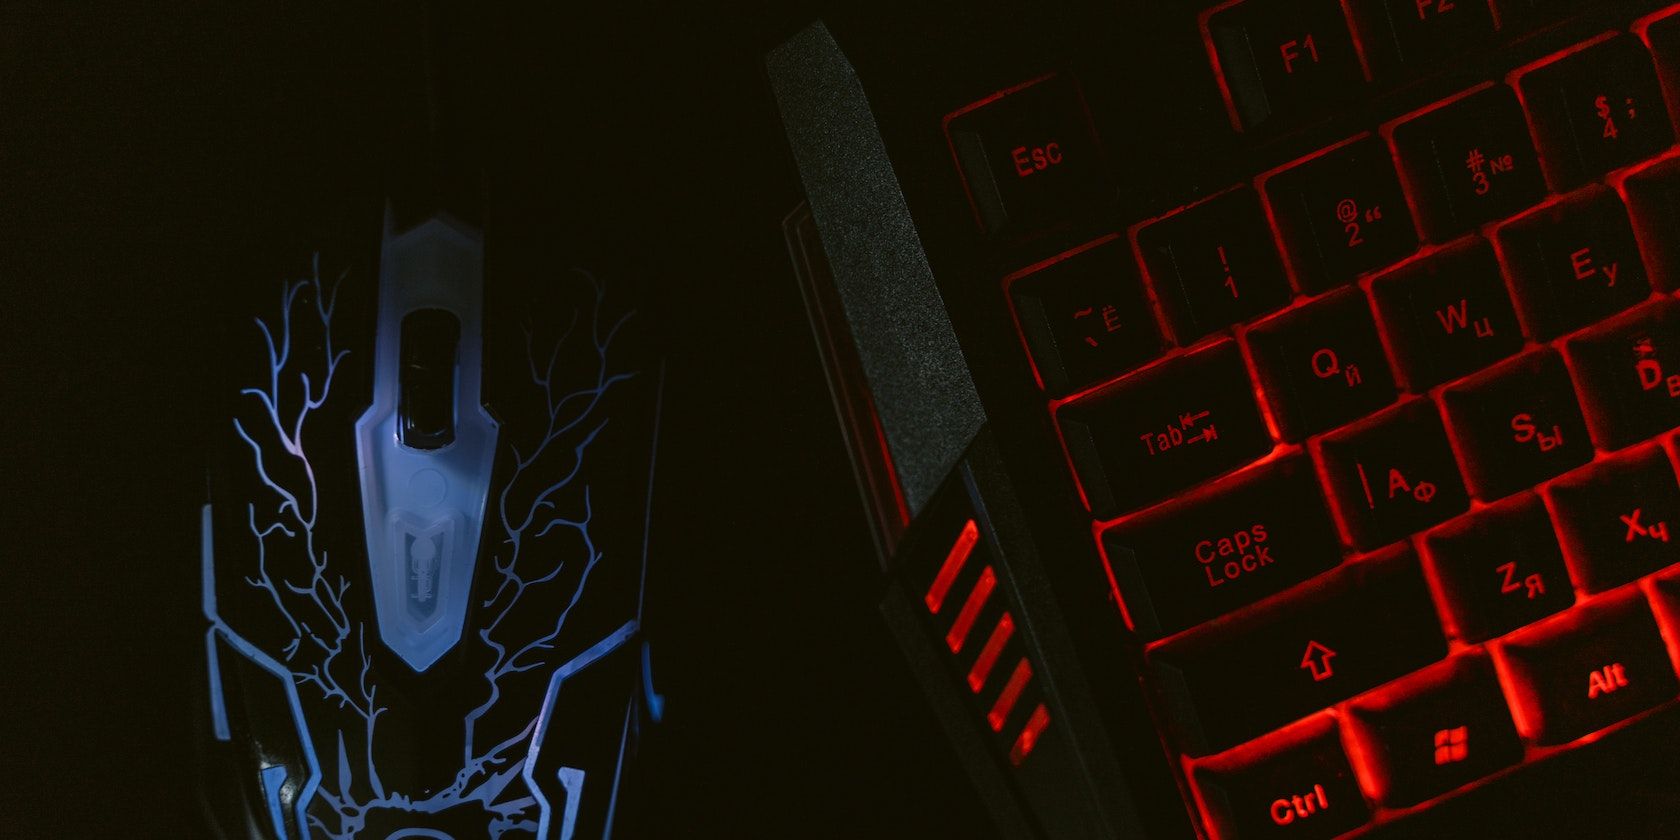 a close up shot of a gaming keyboard and mouse